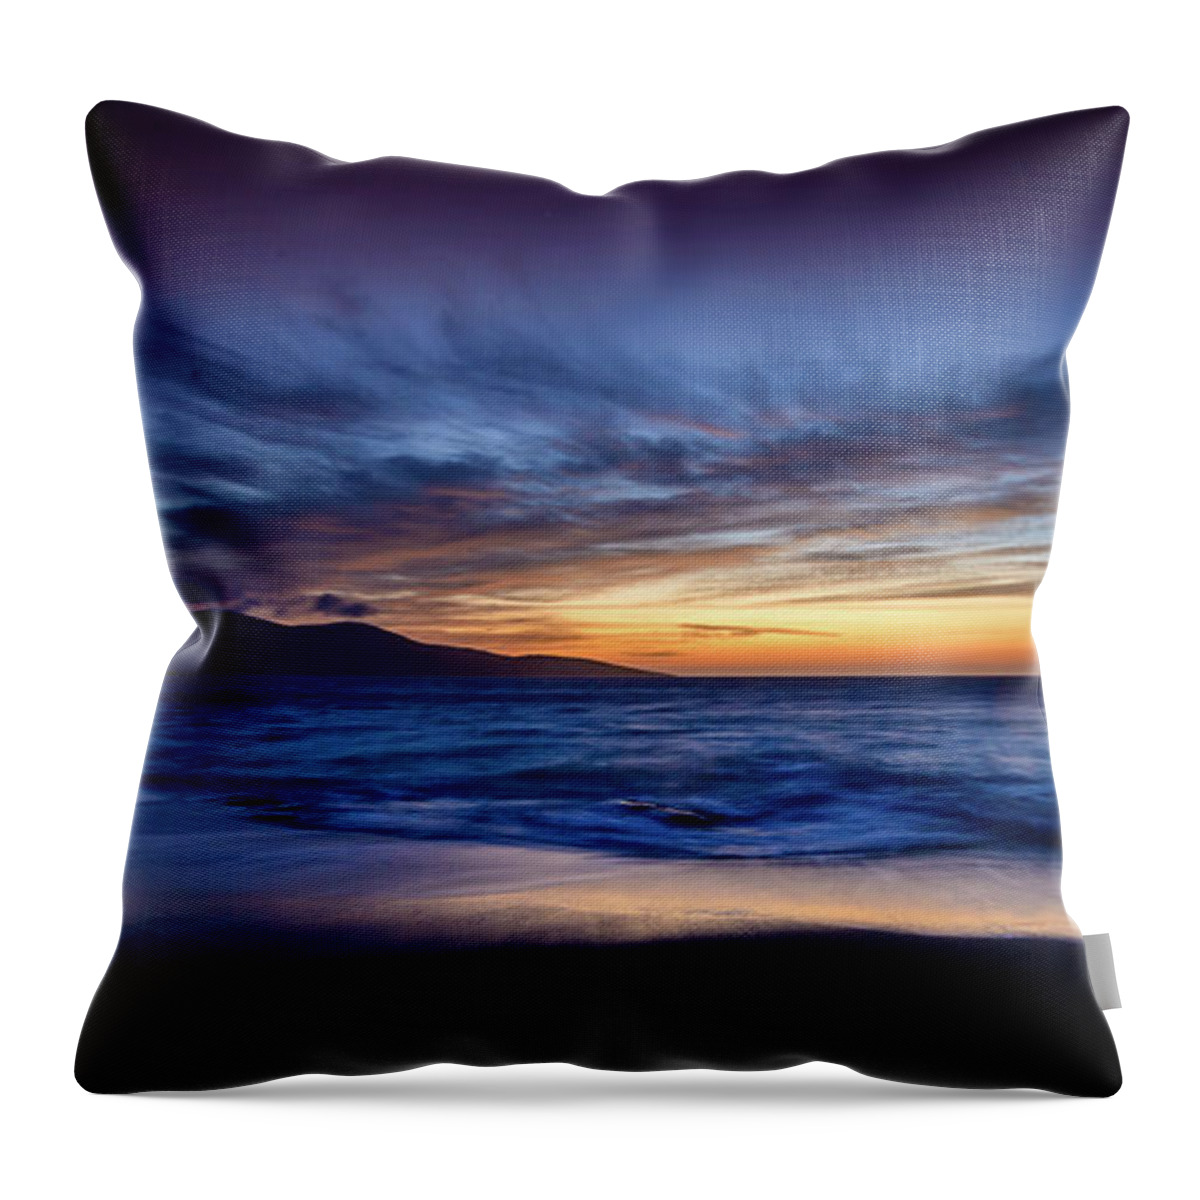 Ceapabhal Throw Pillow featuring the photograph Ceapabhal, Isle of Harris by Peter OReilly